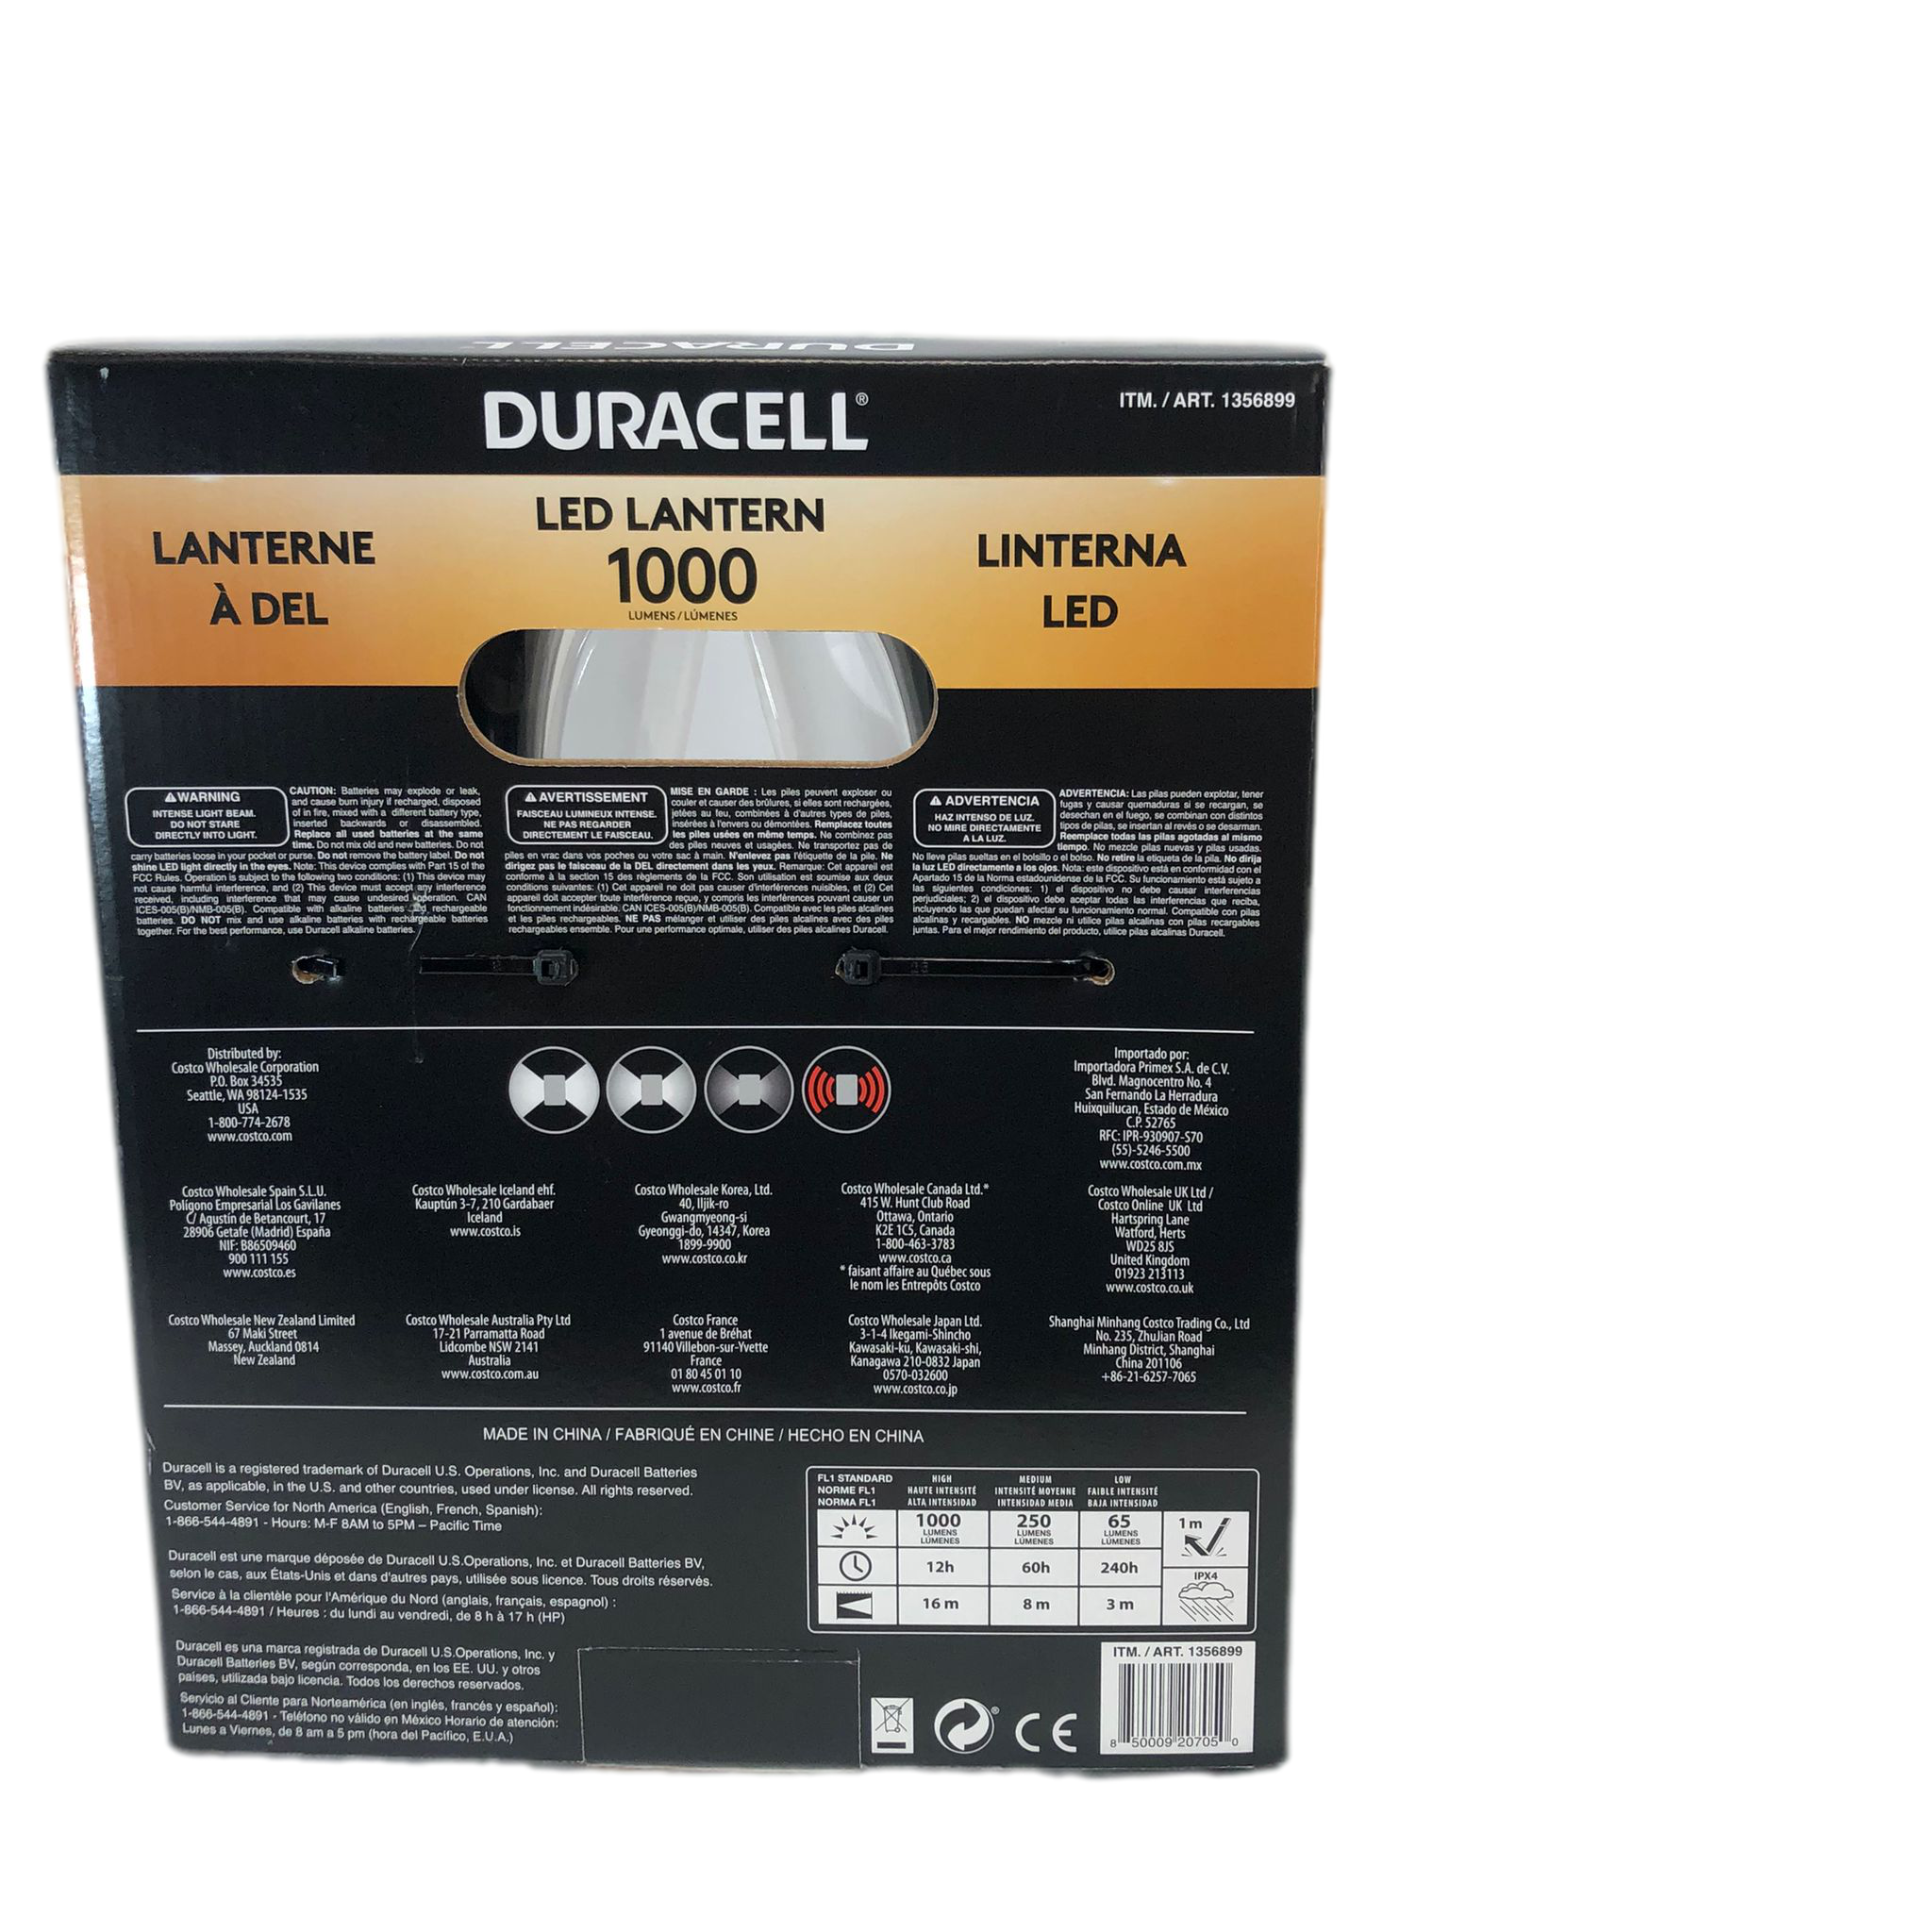 Bargains by Green - Duracell 1000 Lumen Lantern 2 pack Price:$20.00 New  Retail:$30 Features: 1000 Lumen 4 Modes Waterproof 4 D Batteries (Not  Included) Light Output1,000 Lumen Number of Batteries4 Power SourceBattery